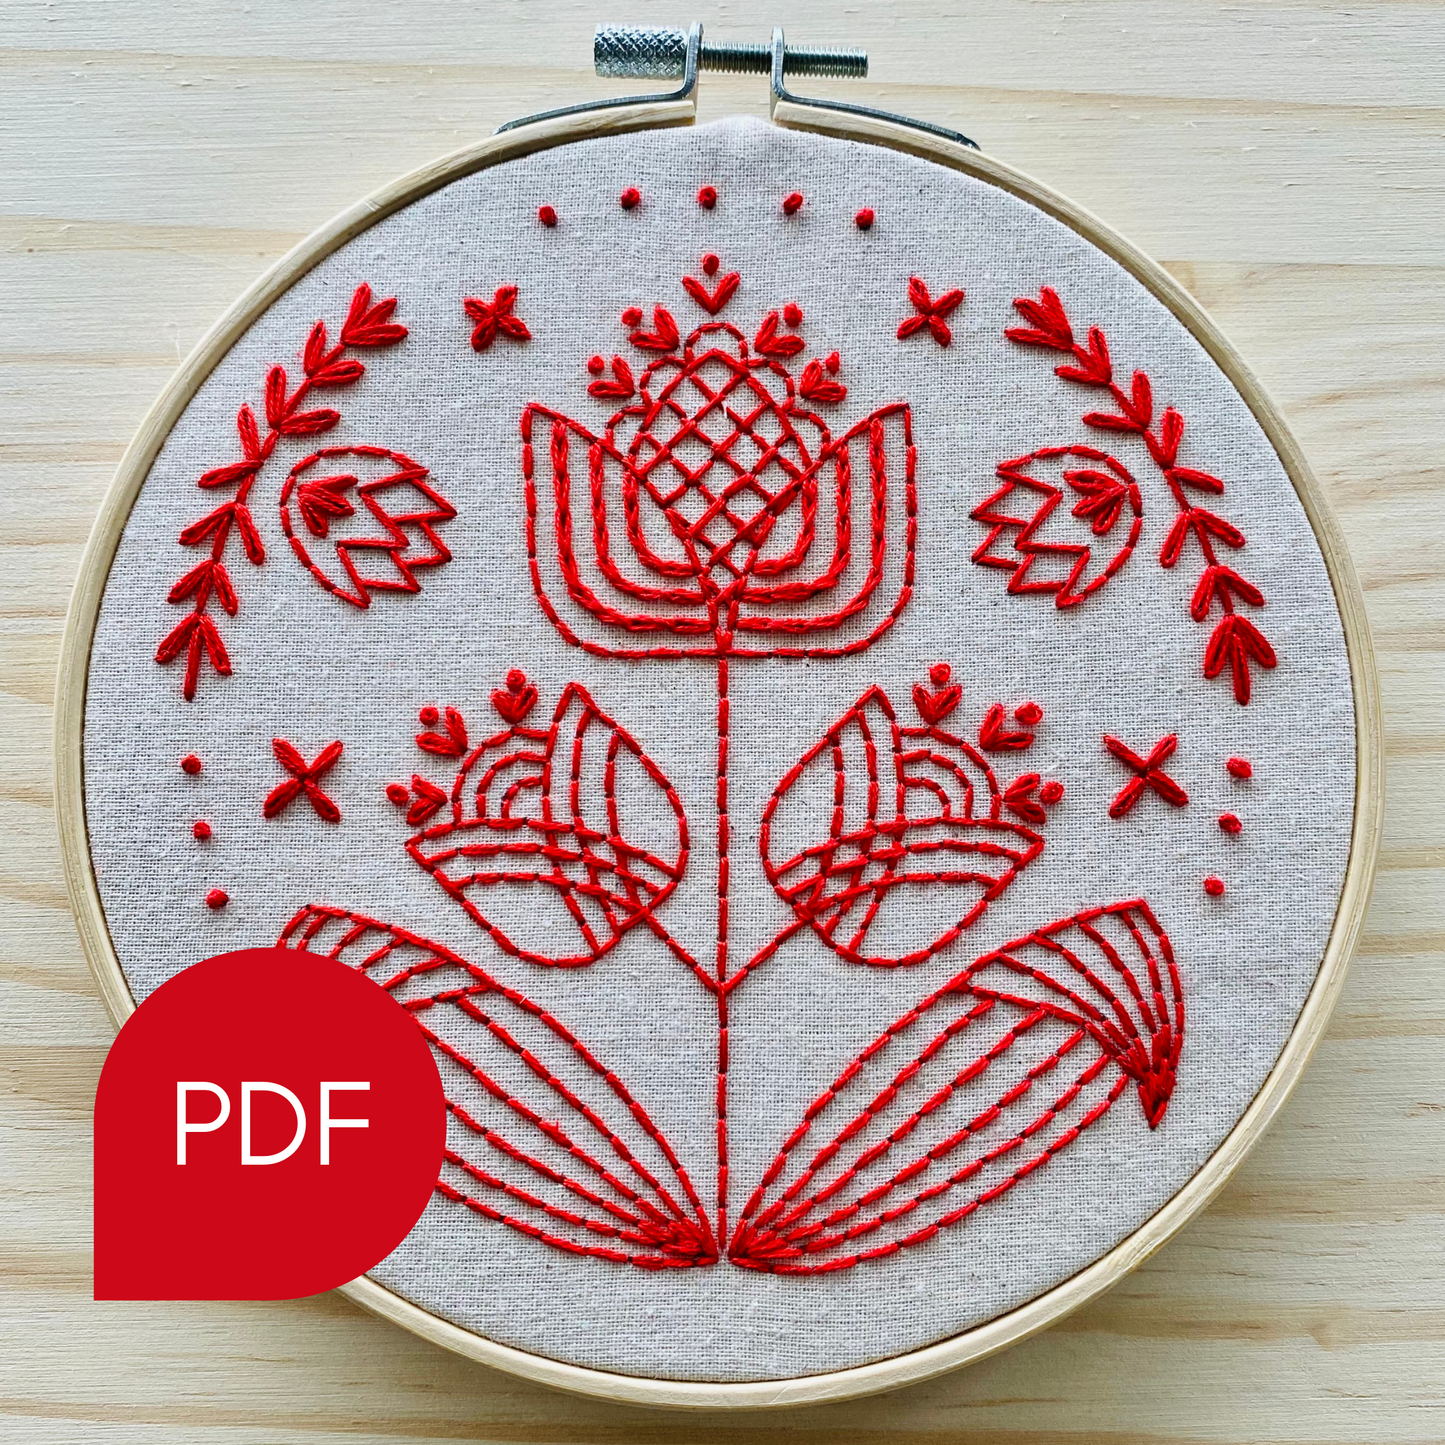 Tulips in Symmetry Embroidery PDF Download